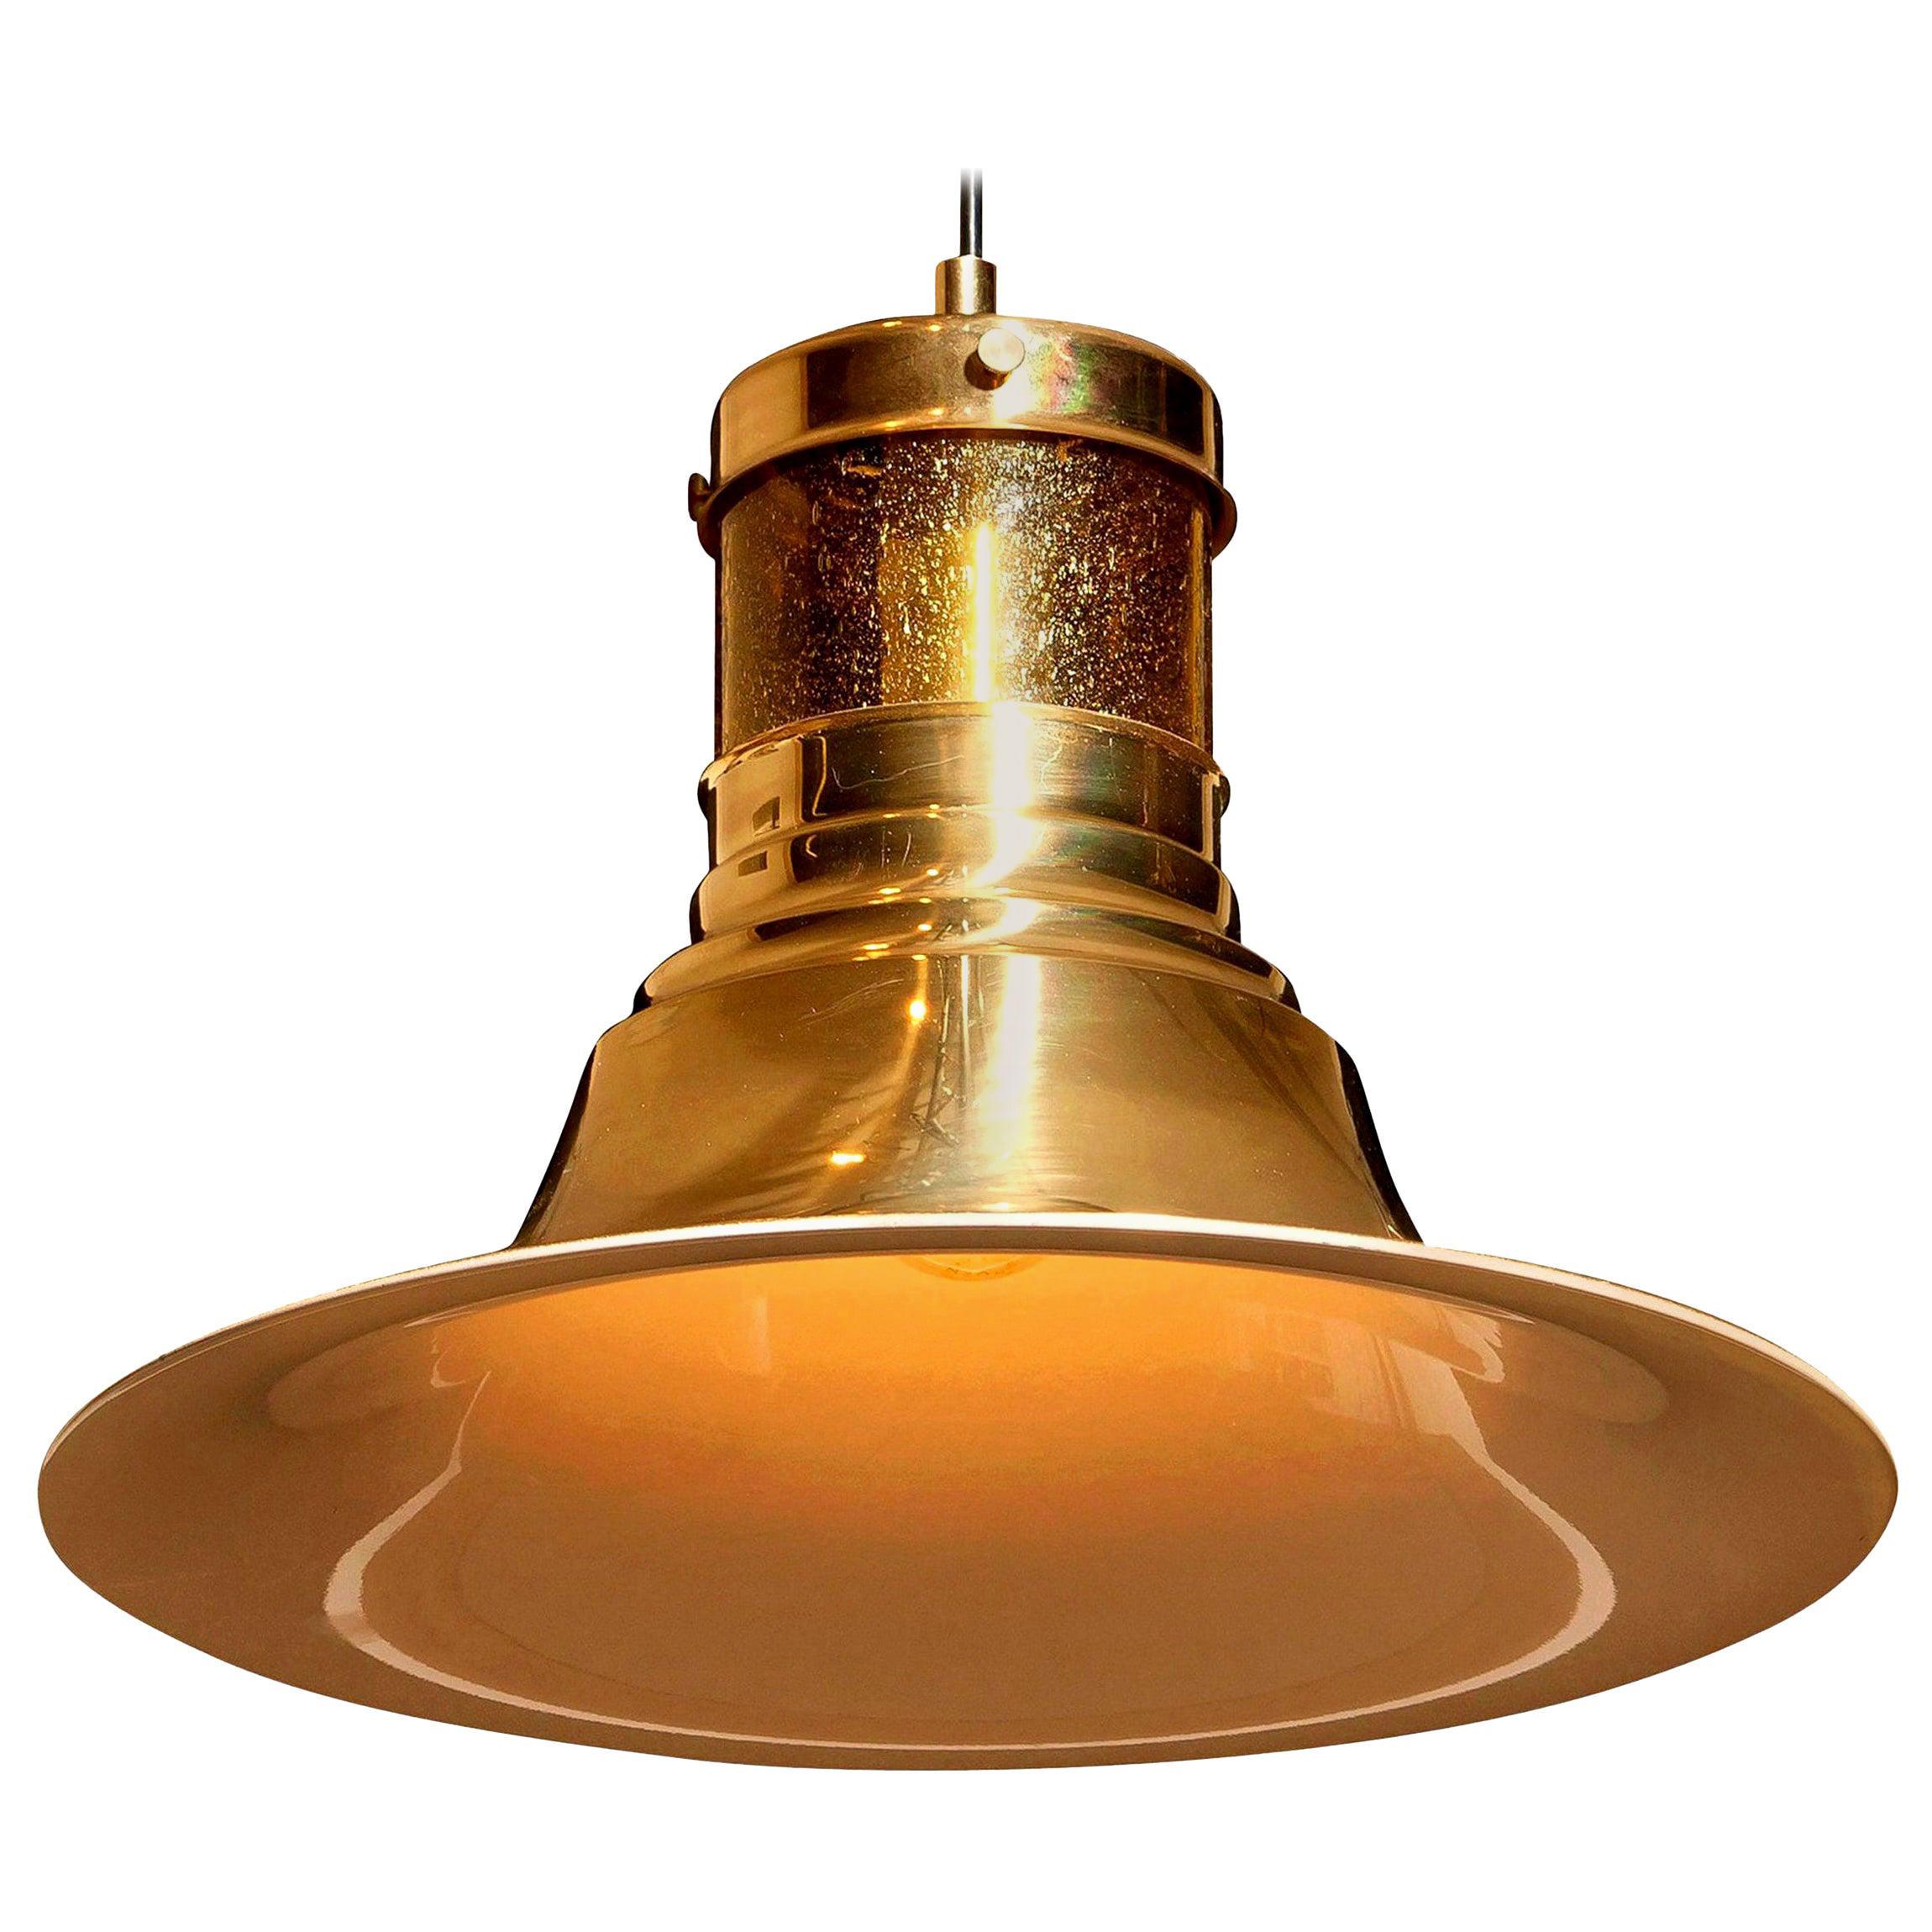 1970s, Brass and Glass Pendant Lamp by Börje Claes for Norellet, Sweden